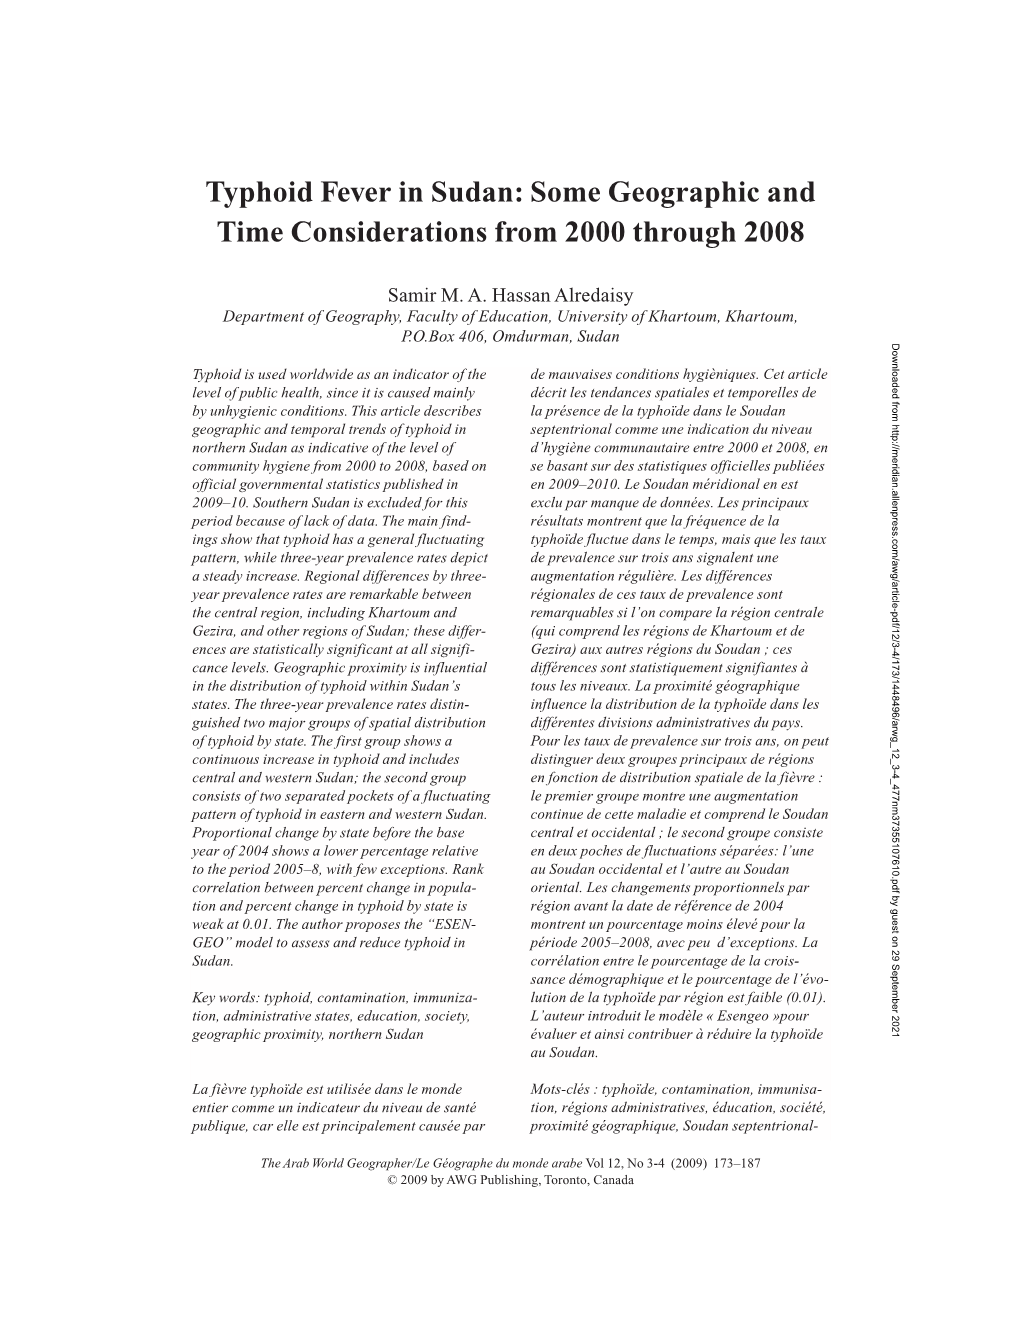 Typhoid Fever in Sudan: Some Geographic and Time Considerations from 2000 Through 2008